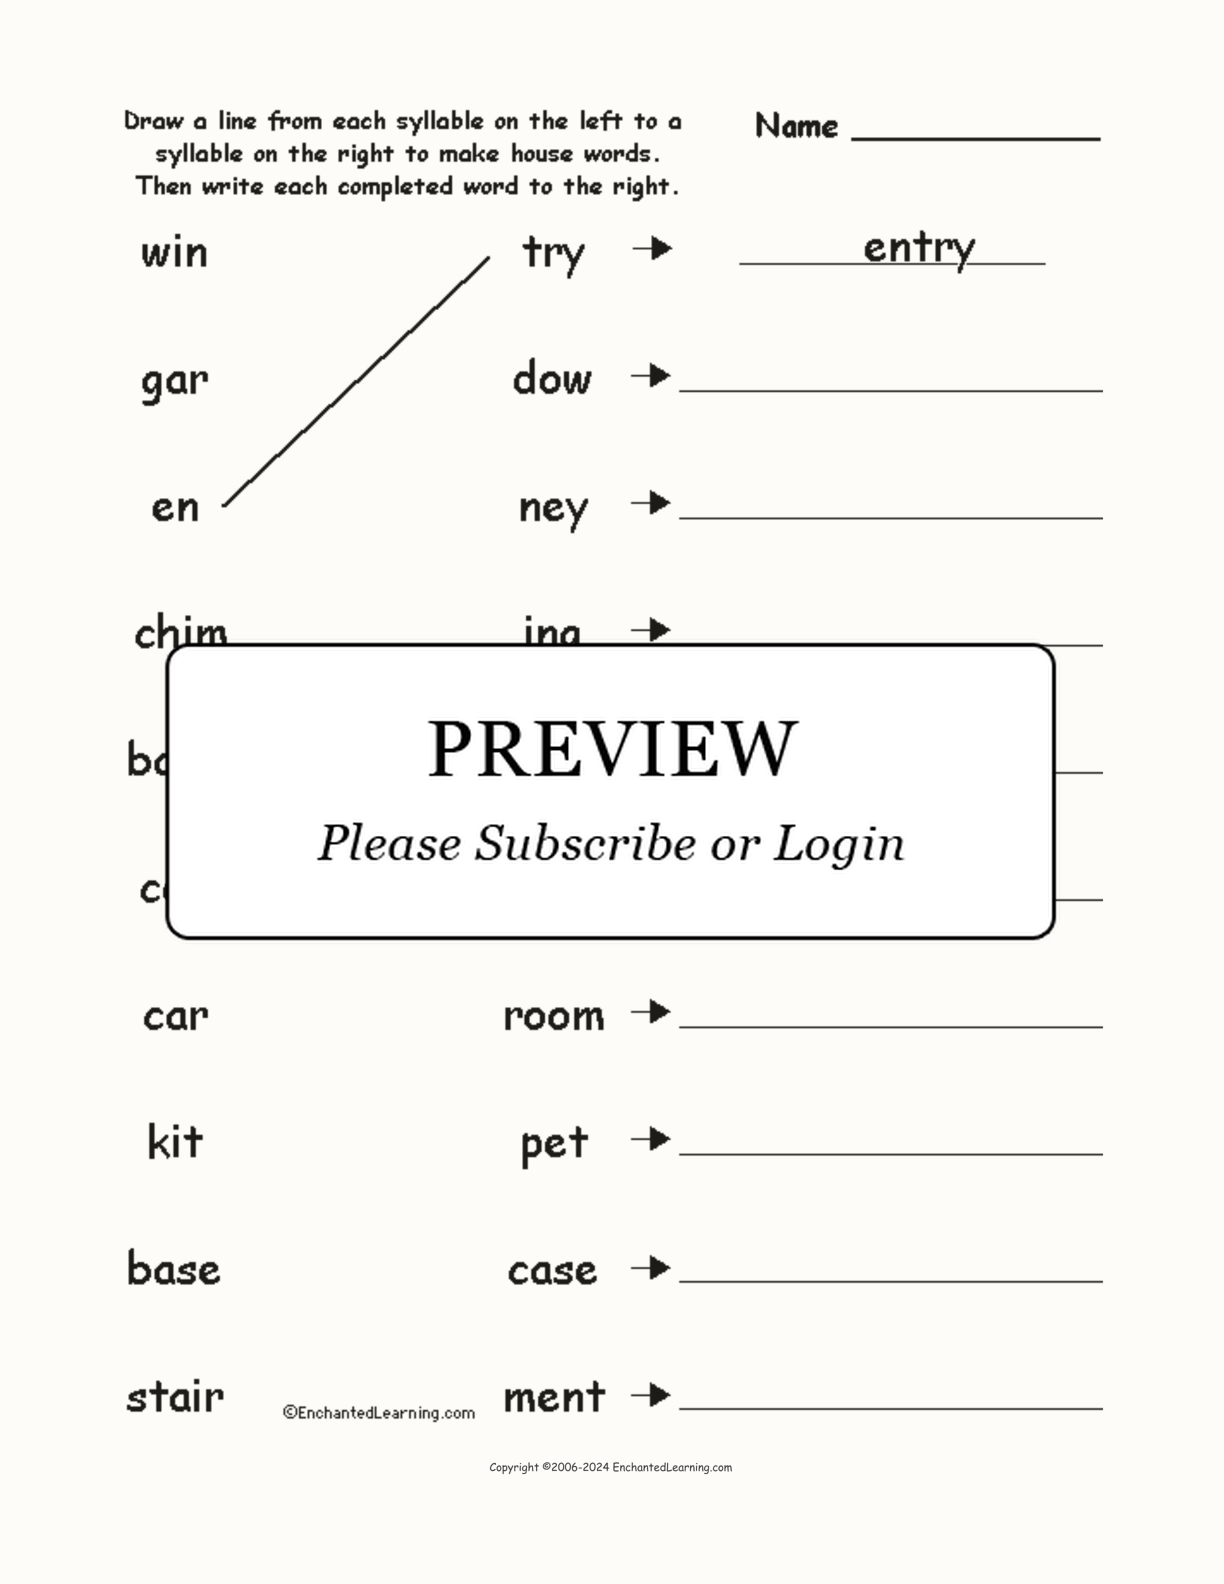 Match the Syllables: House Words interactive worksheet page 1